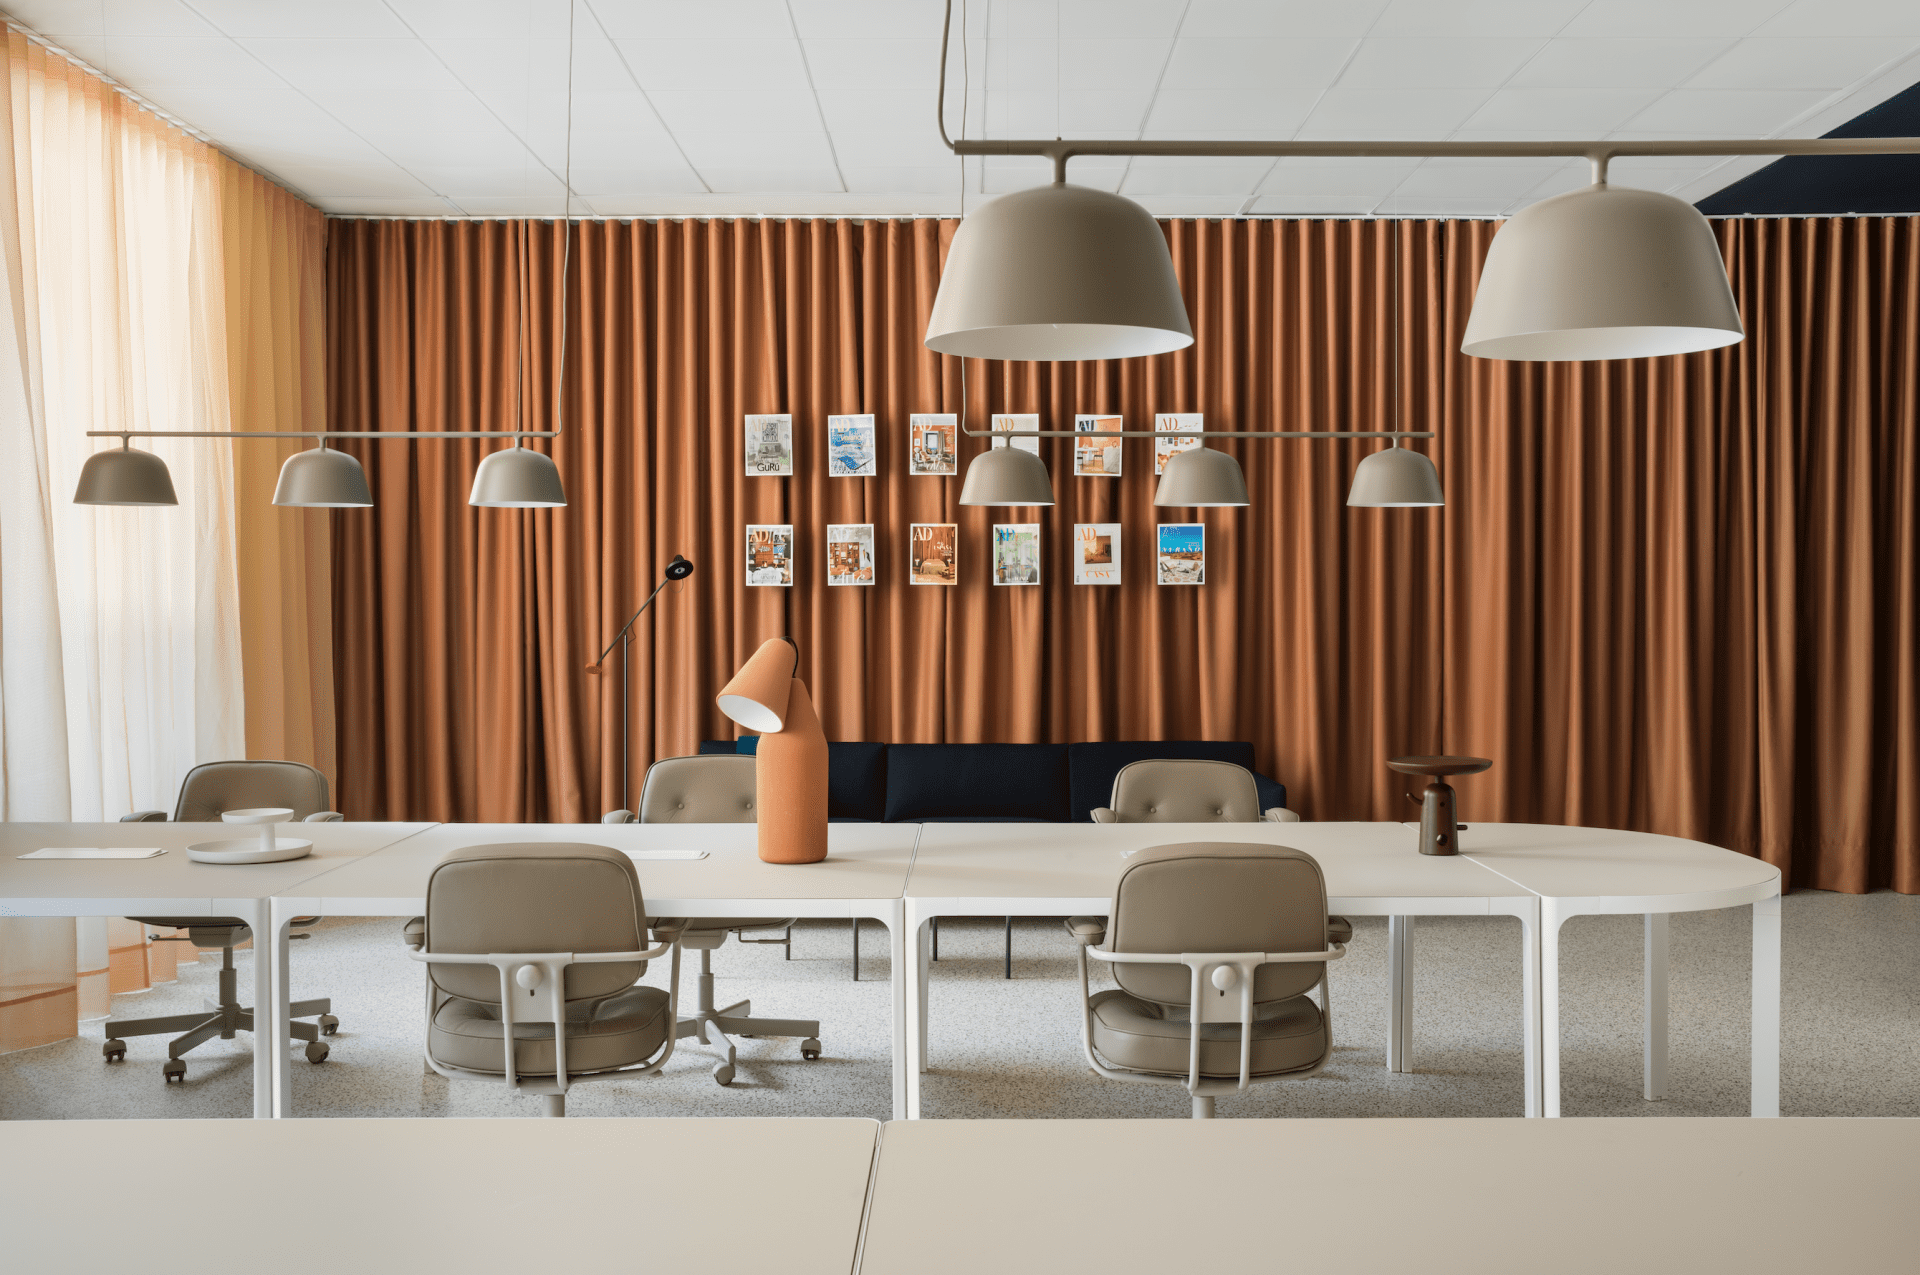 Tarkett’s iQ Surface adds to the creative flair of AD Spain's Madrid office